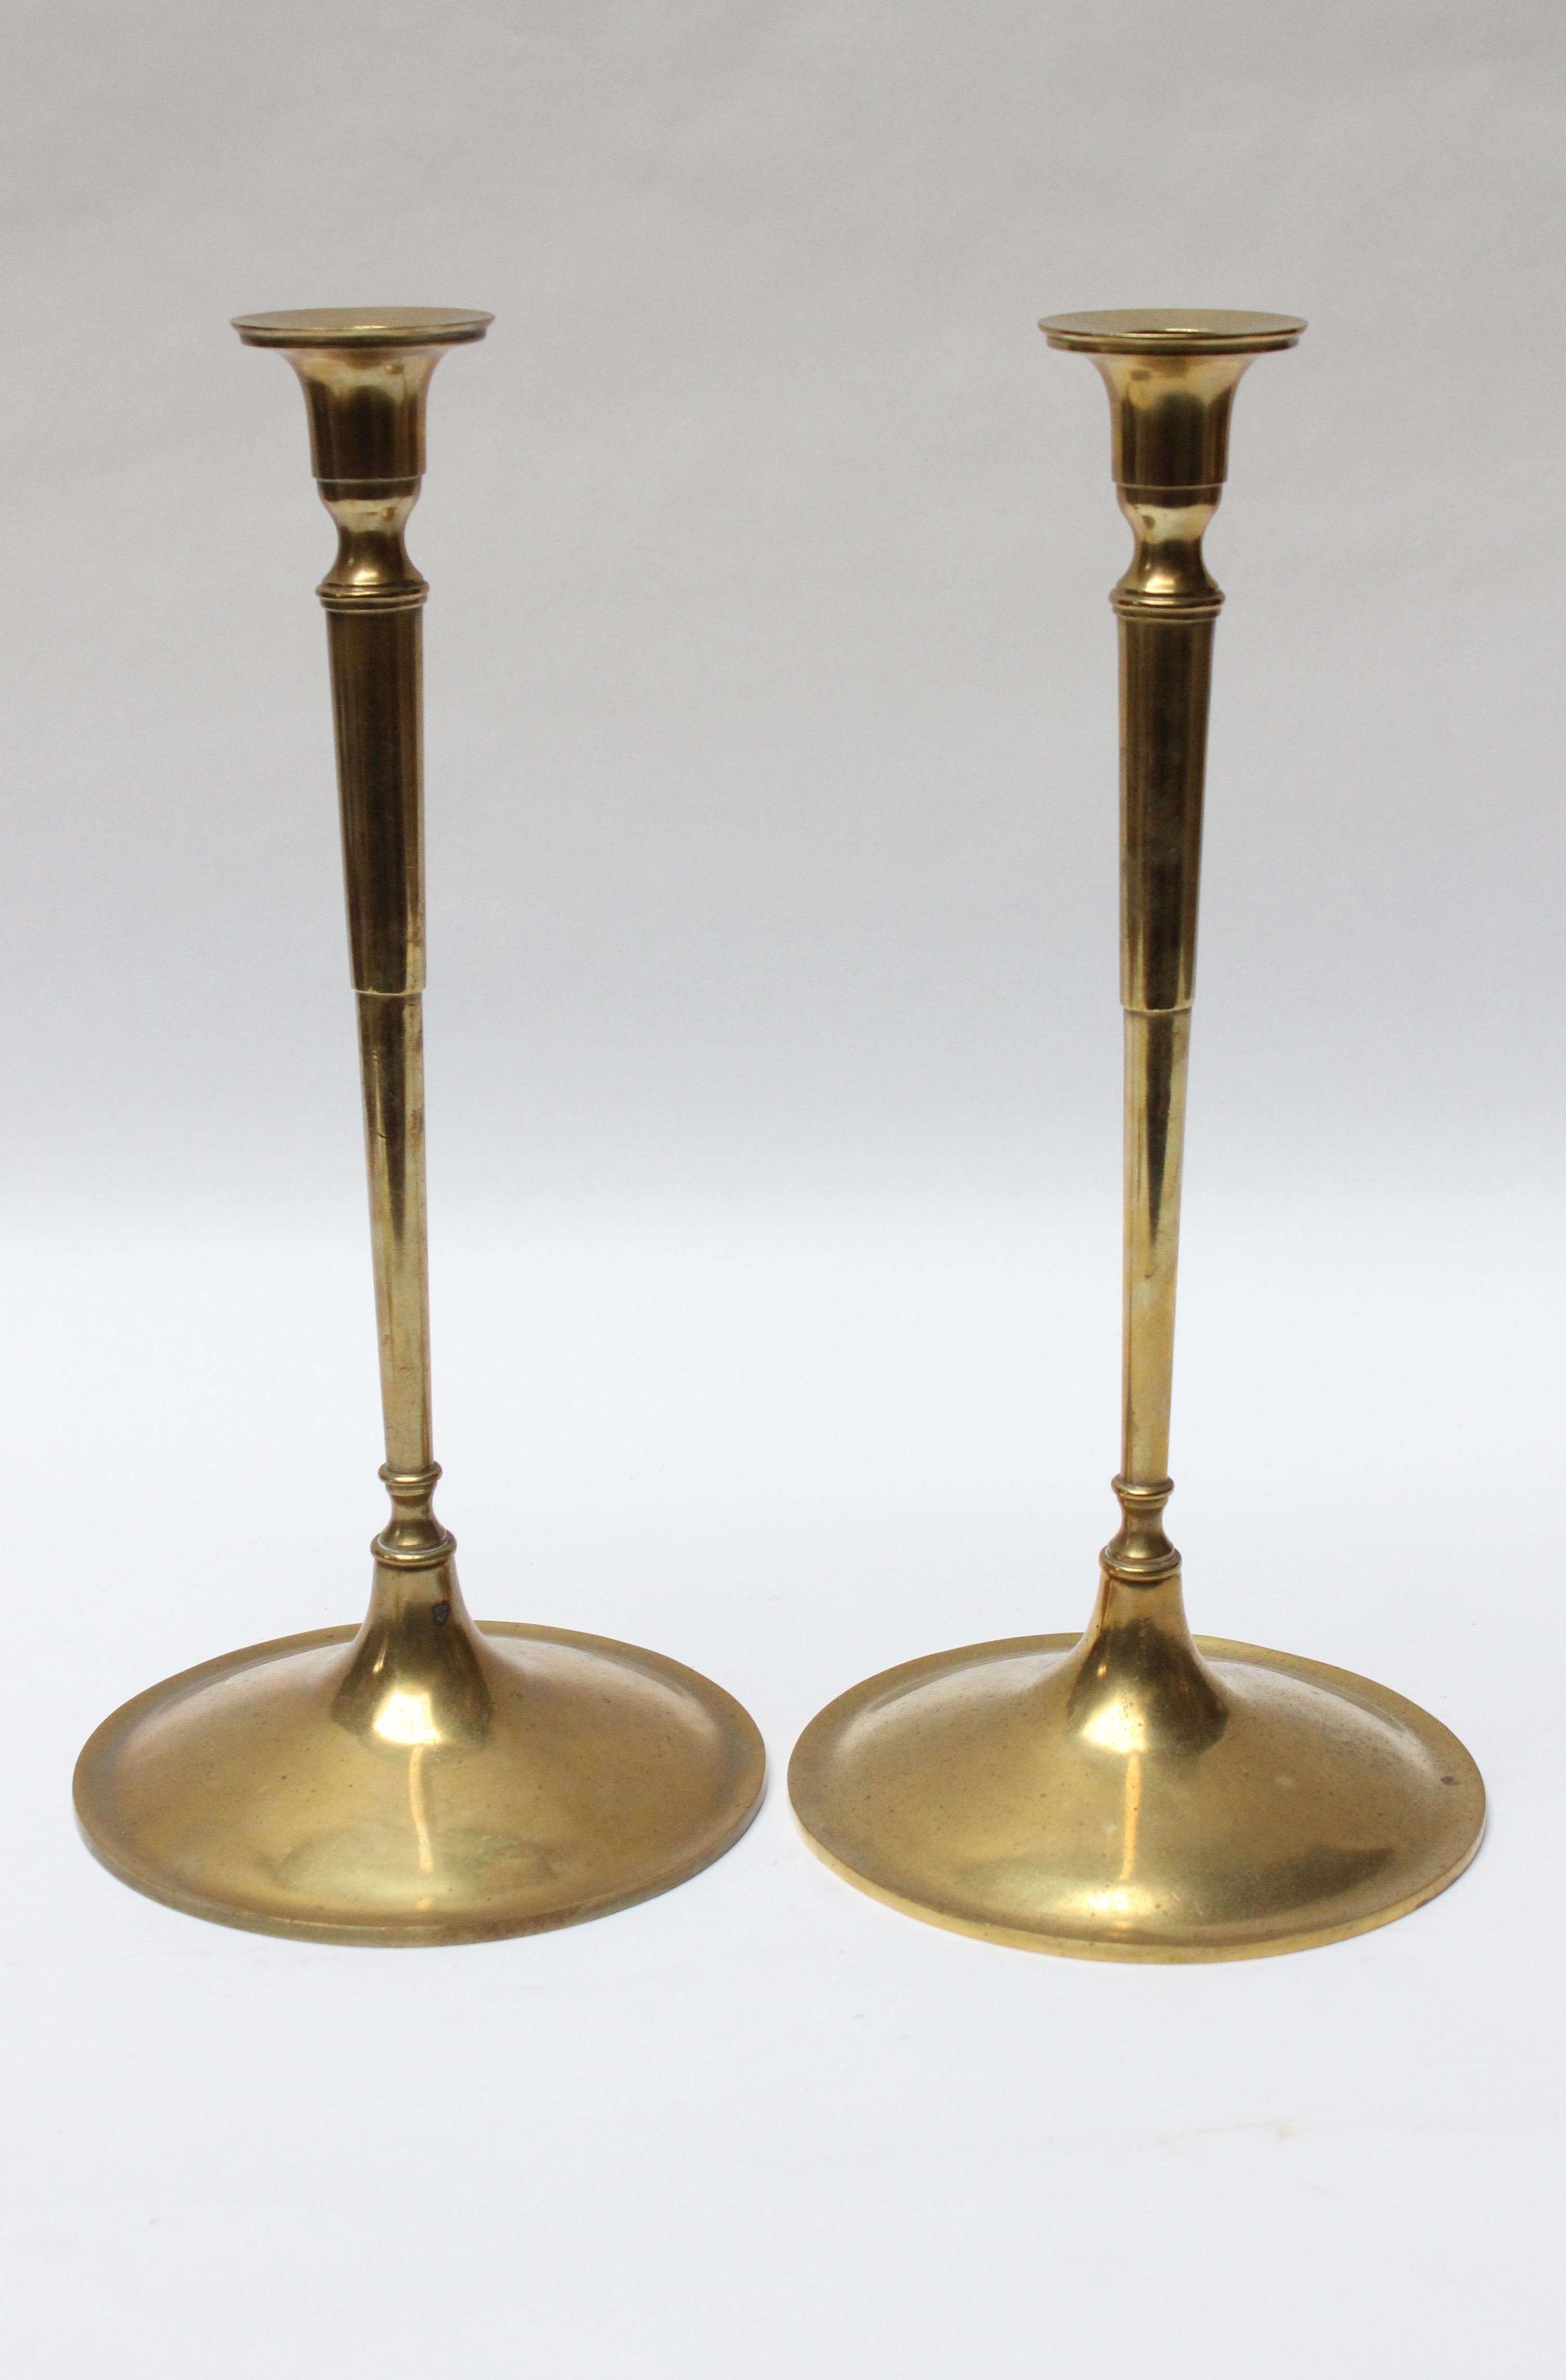 Tall Art & Crafts style brass turned candlesticks with wide circular bases designed by Nashua Brass Co. (ca. 1920s, USA).
Original, unpolished condition with rich patina / age-consistent wear (particularly to the stems and bases), as